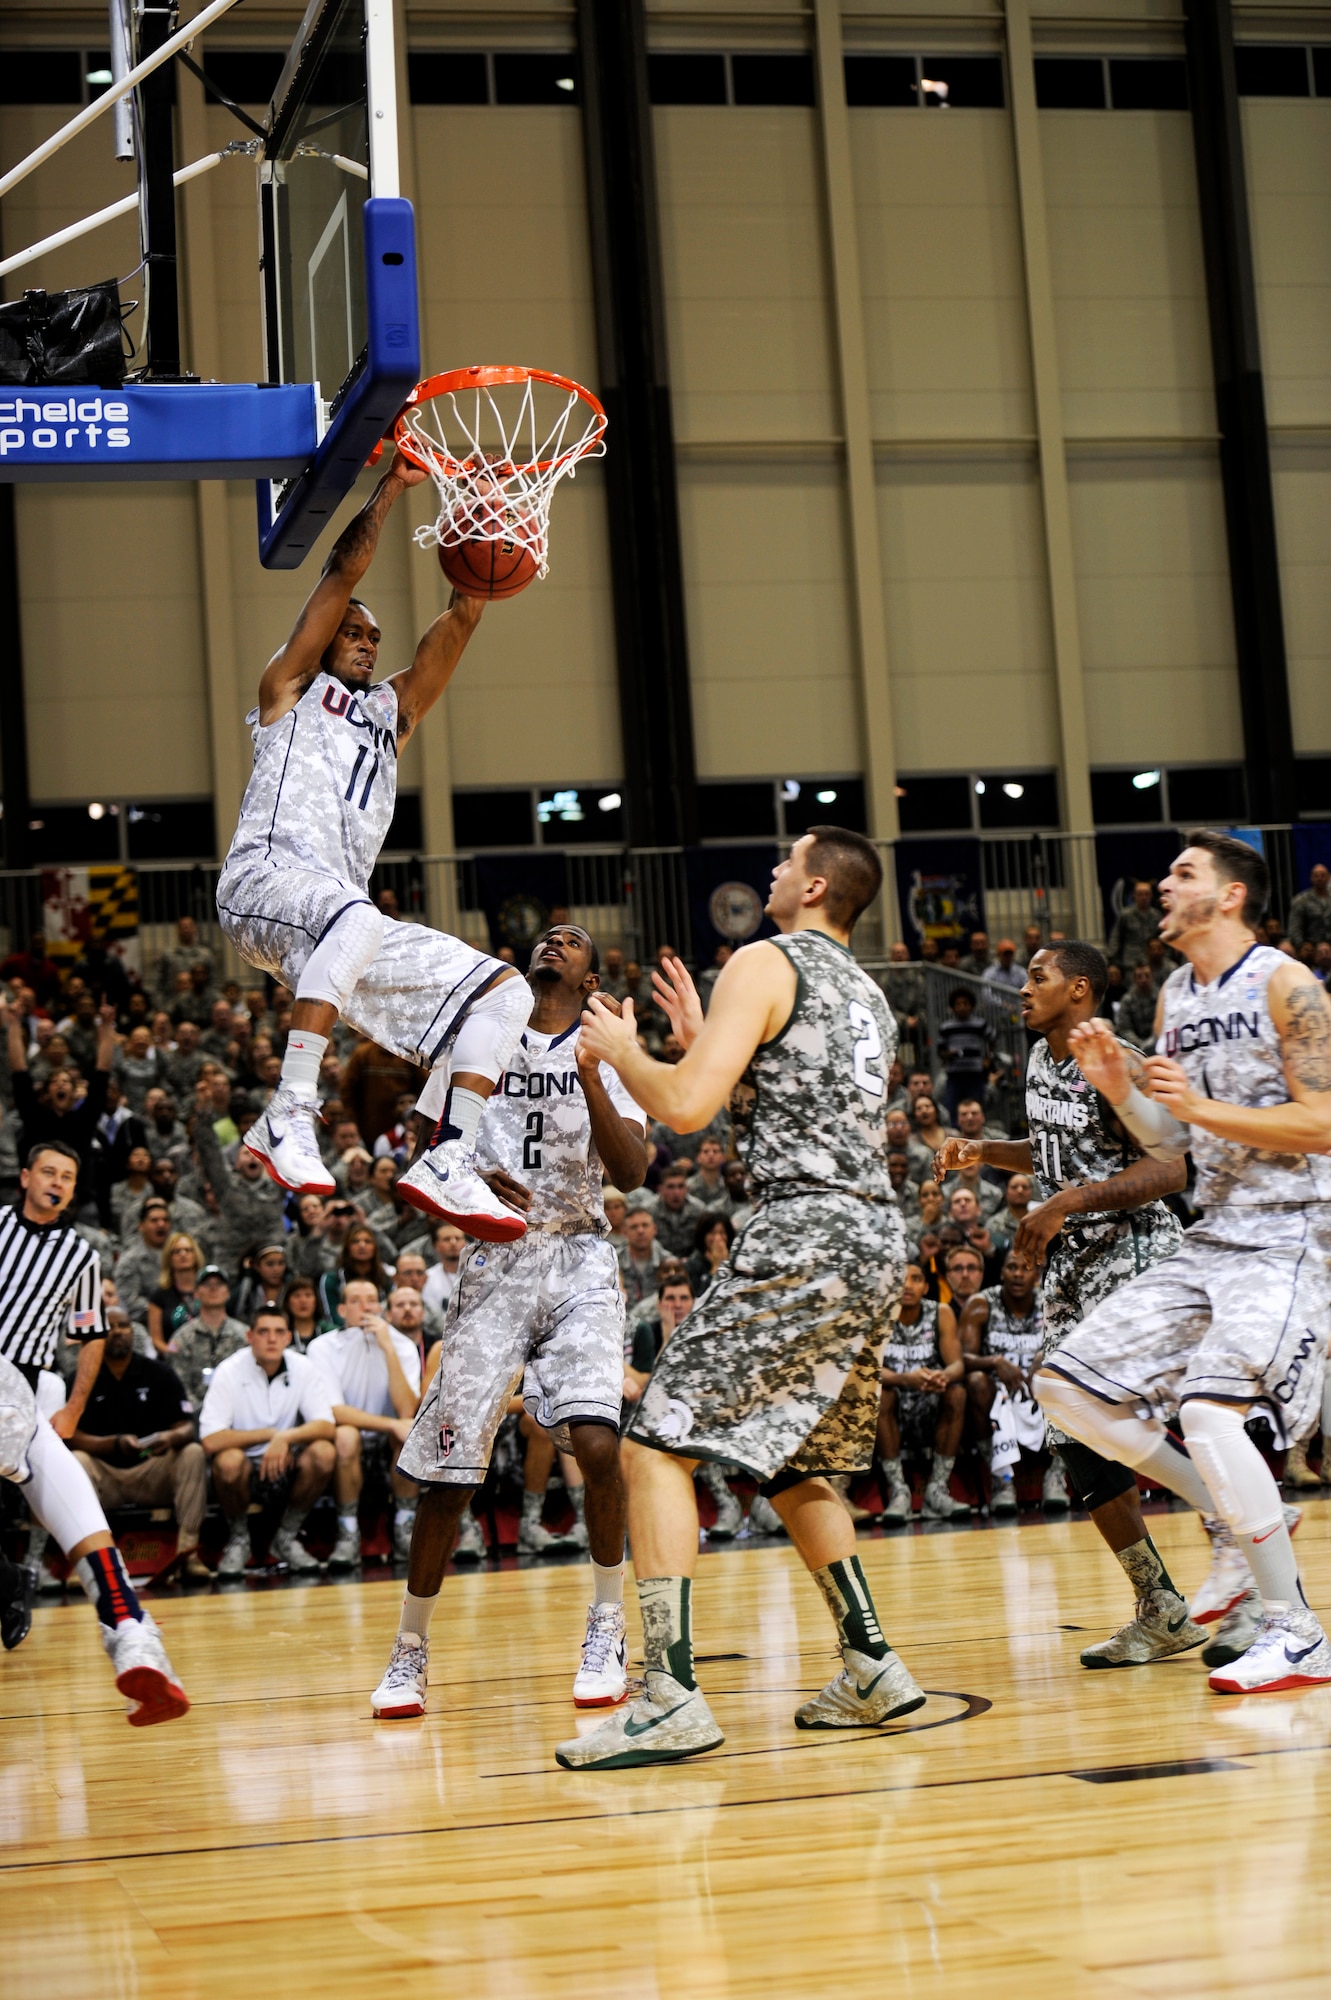 Ryan Boatright, University of Connecticut point guard, dunks during the 2012 Armed Forces Classic on Ramstein Air Base, Germany, Nov. 10, 2012. The match-up between Michigan State University and UCONN is part of ESPN's Veteran's week initiative to honor the men and women who have served and are still serving in the U.S. military. (U.S. Air Force photo/Senior Airman Aaron-Forrest Wainwright)